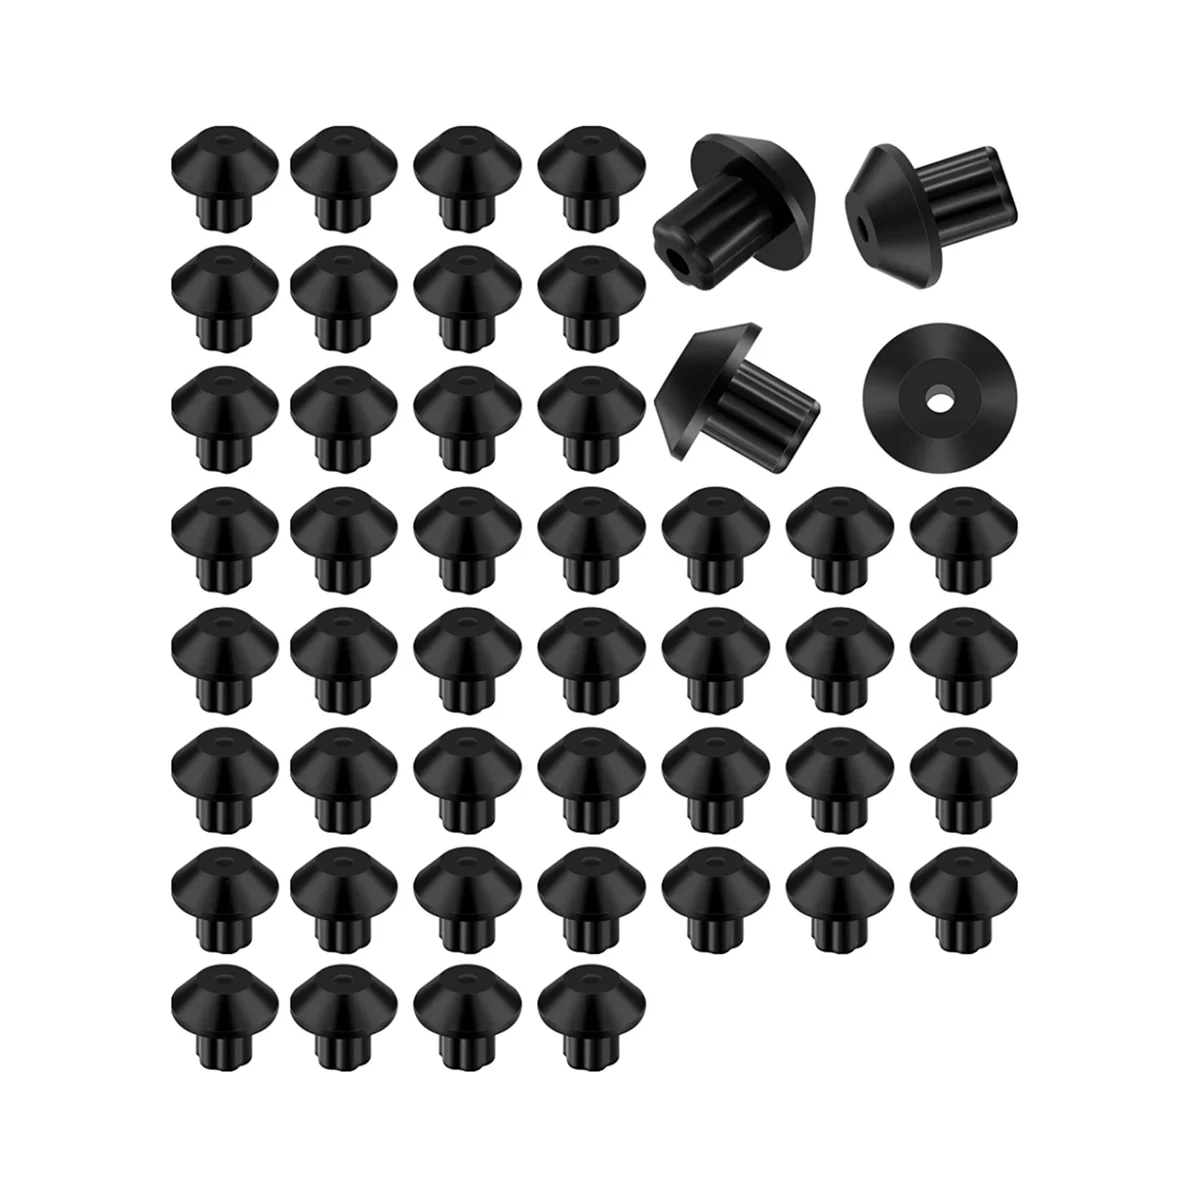 

48 Pcs Rubber Grate Feet Rubber Foot Replacements Compatible with GE WB2K101 Gas Range Burner Grate Replace WB02T10461